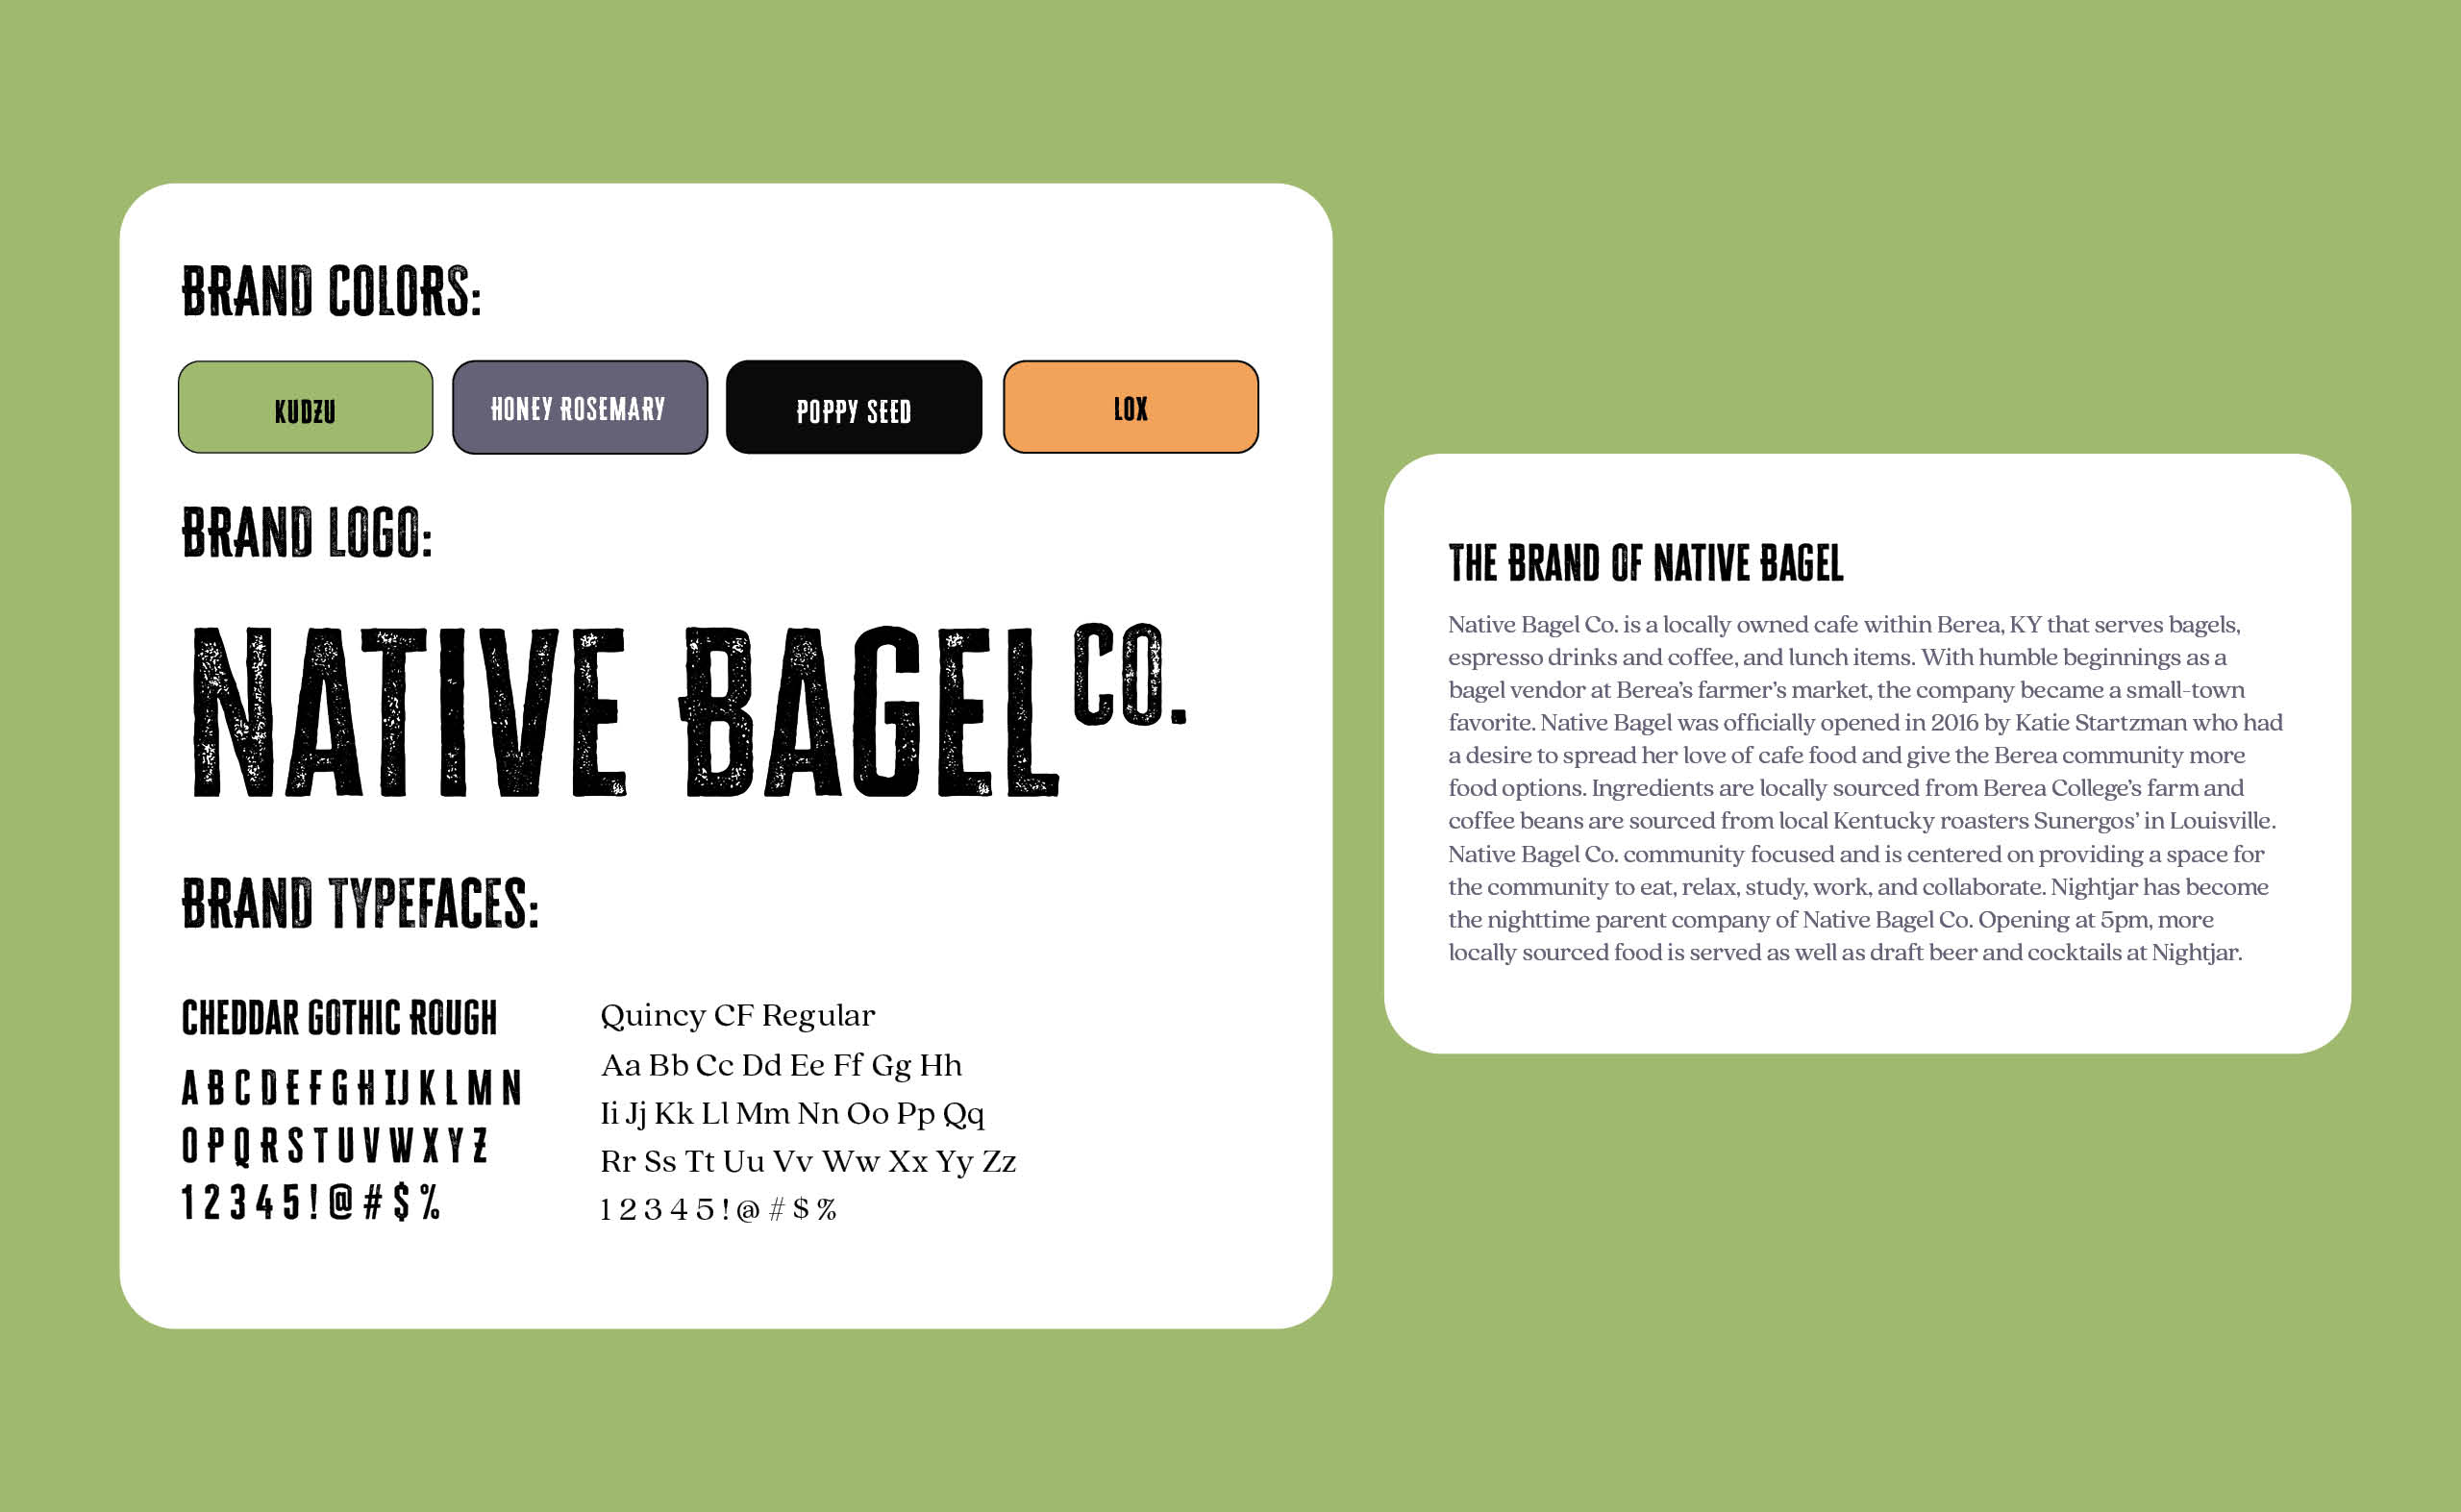 Brand assets alongside a text box that reads: Native Bagel Co. is a locally owned cafe within Berea, KY that serves bagels, espresso drinks and coffee, and lunch items. With humble beginnings as a bagel vendor at Berea’s farmer’s market, the company became a small-town favorite. Native Bagel was officially opened in 2016 by Katie Startzman who had a desire to spread her love of cafe food and give the Berea community more food options. Ingredients are locally sourced from Berea College’s farm and coffee beans are sourced from local Kentucky roasters Sunergos’ in Louisville. Native Bagel Co. community focused and is centered on providing a space for the community to eat, relax, study, work, and collaborate. Nightjar has become the nighttime parent company of Native Bagel Co. Opening at 5pm, more locally sourced food is served as well as draft beer and cocktails at Nightjar.